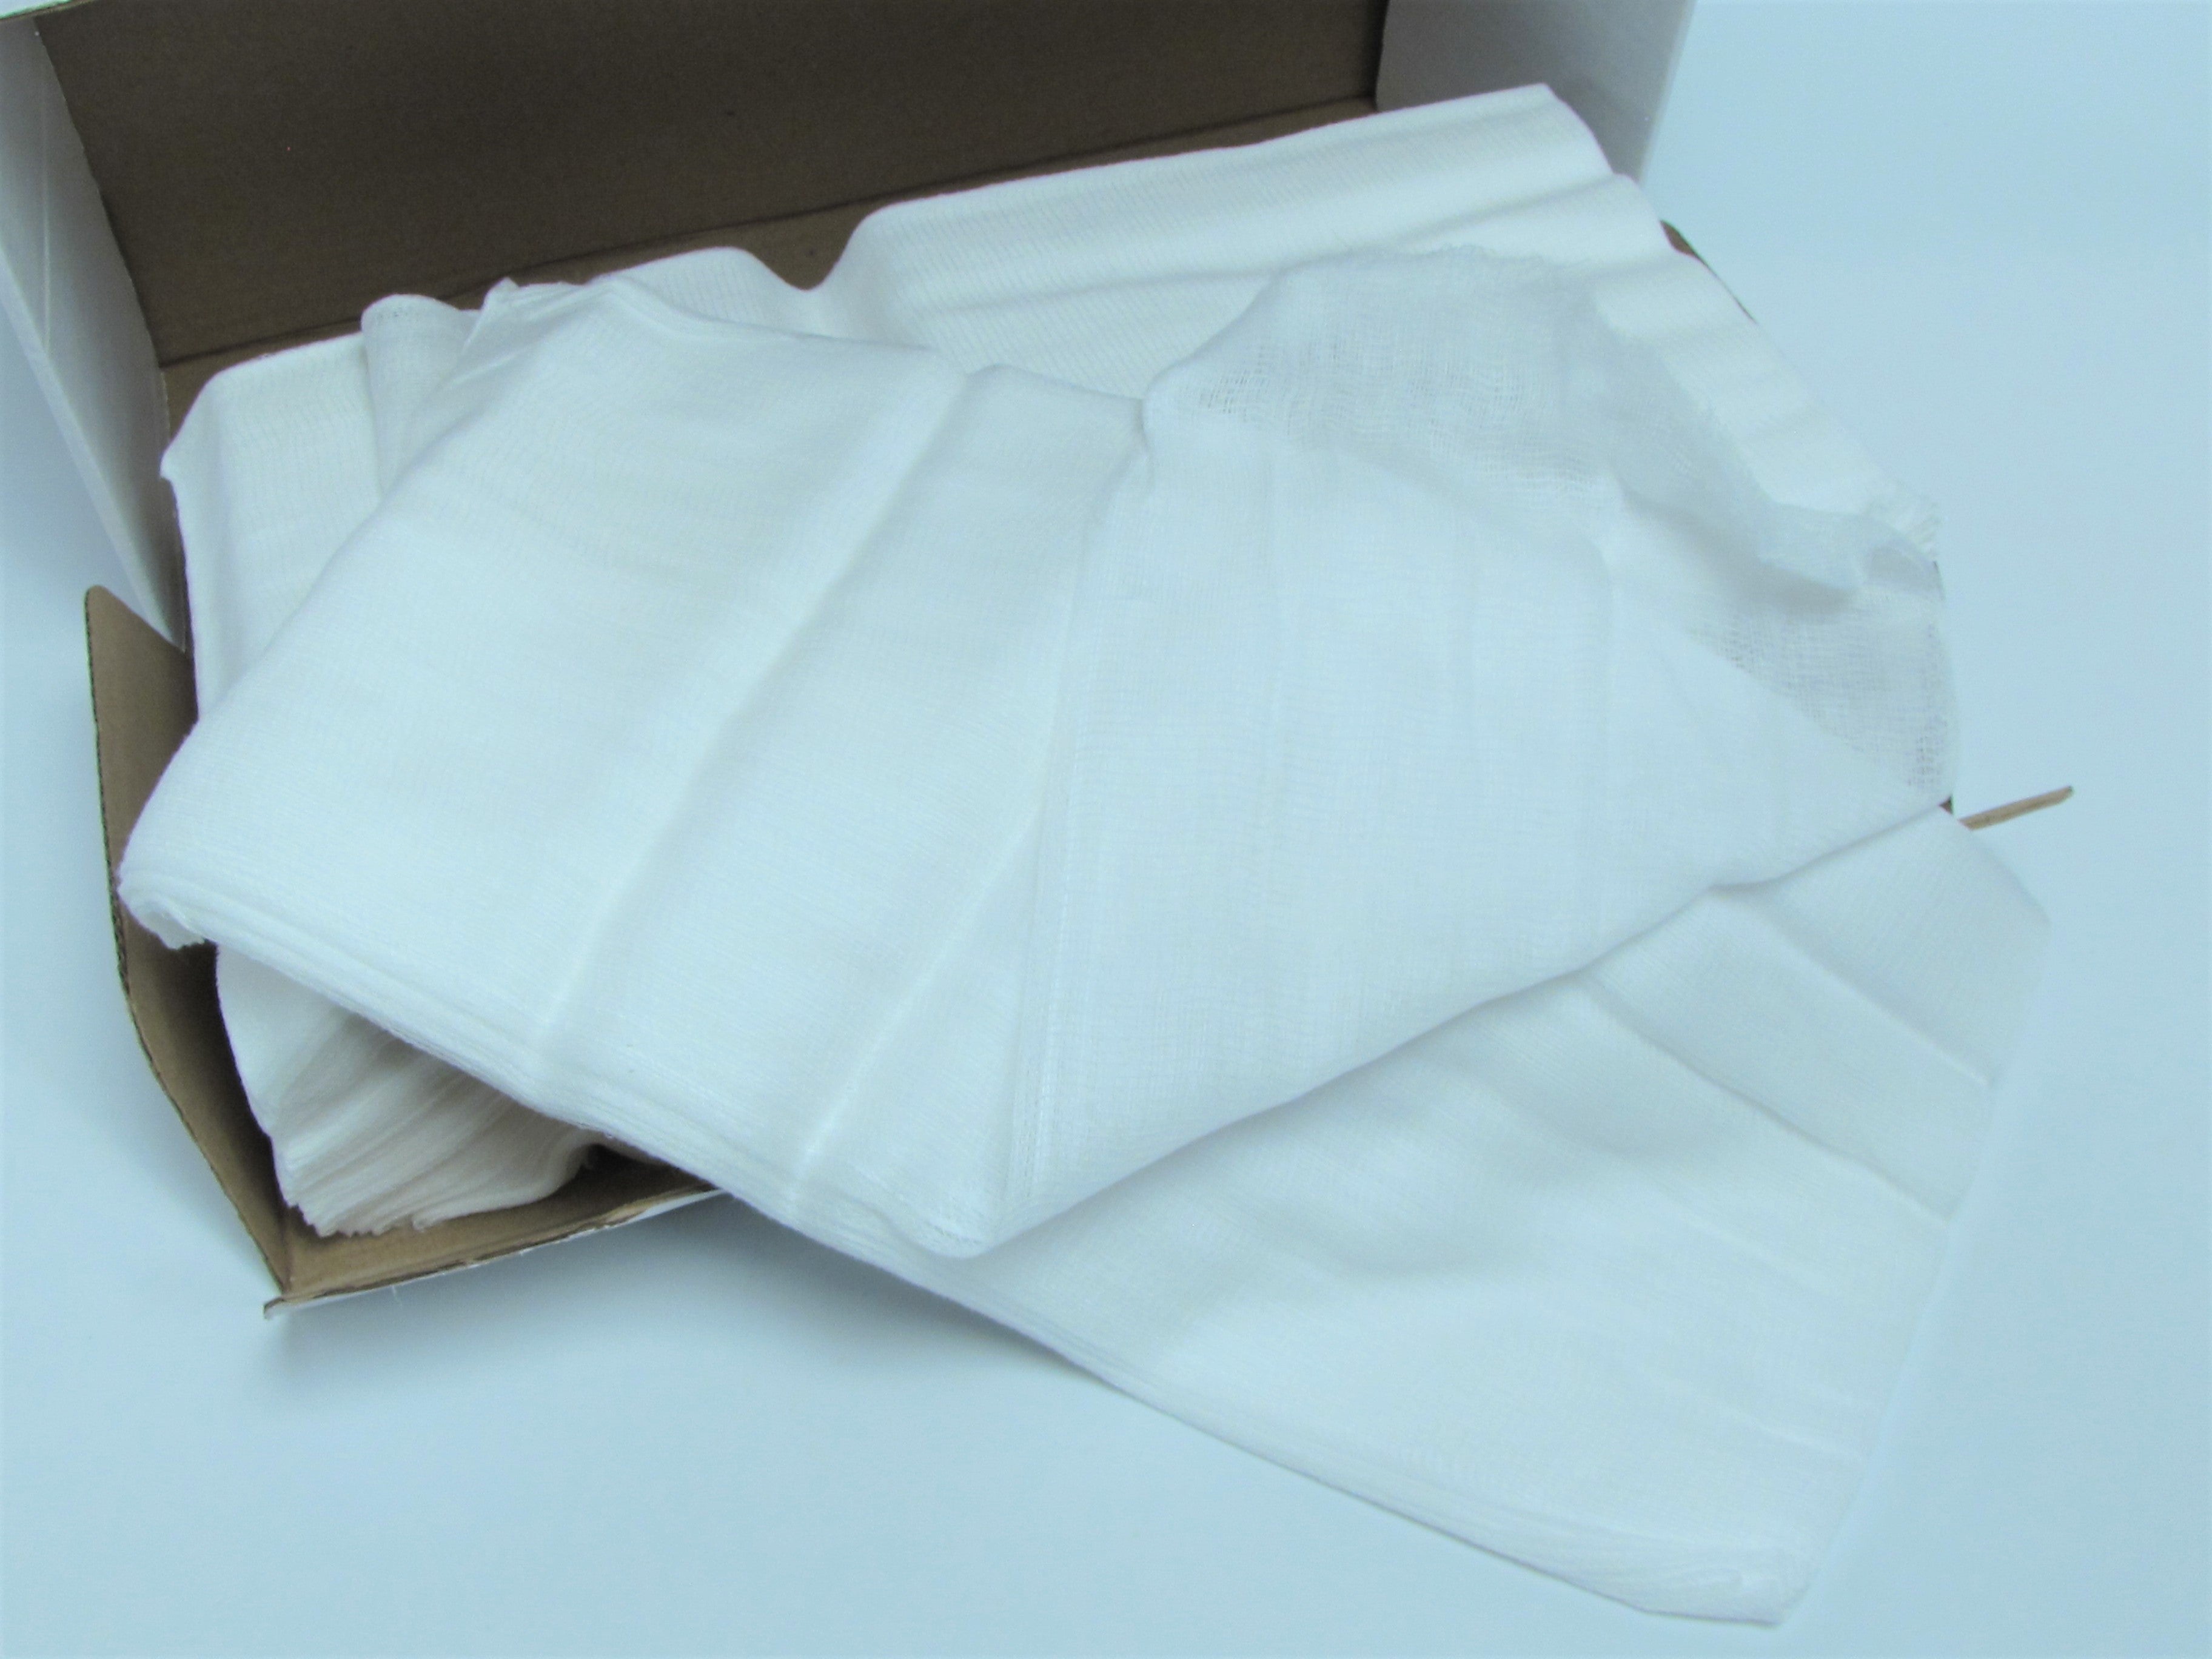 Linen cloth for pressing cheese 80x80cm